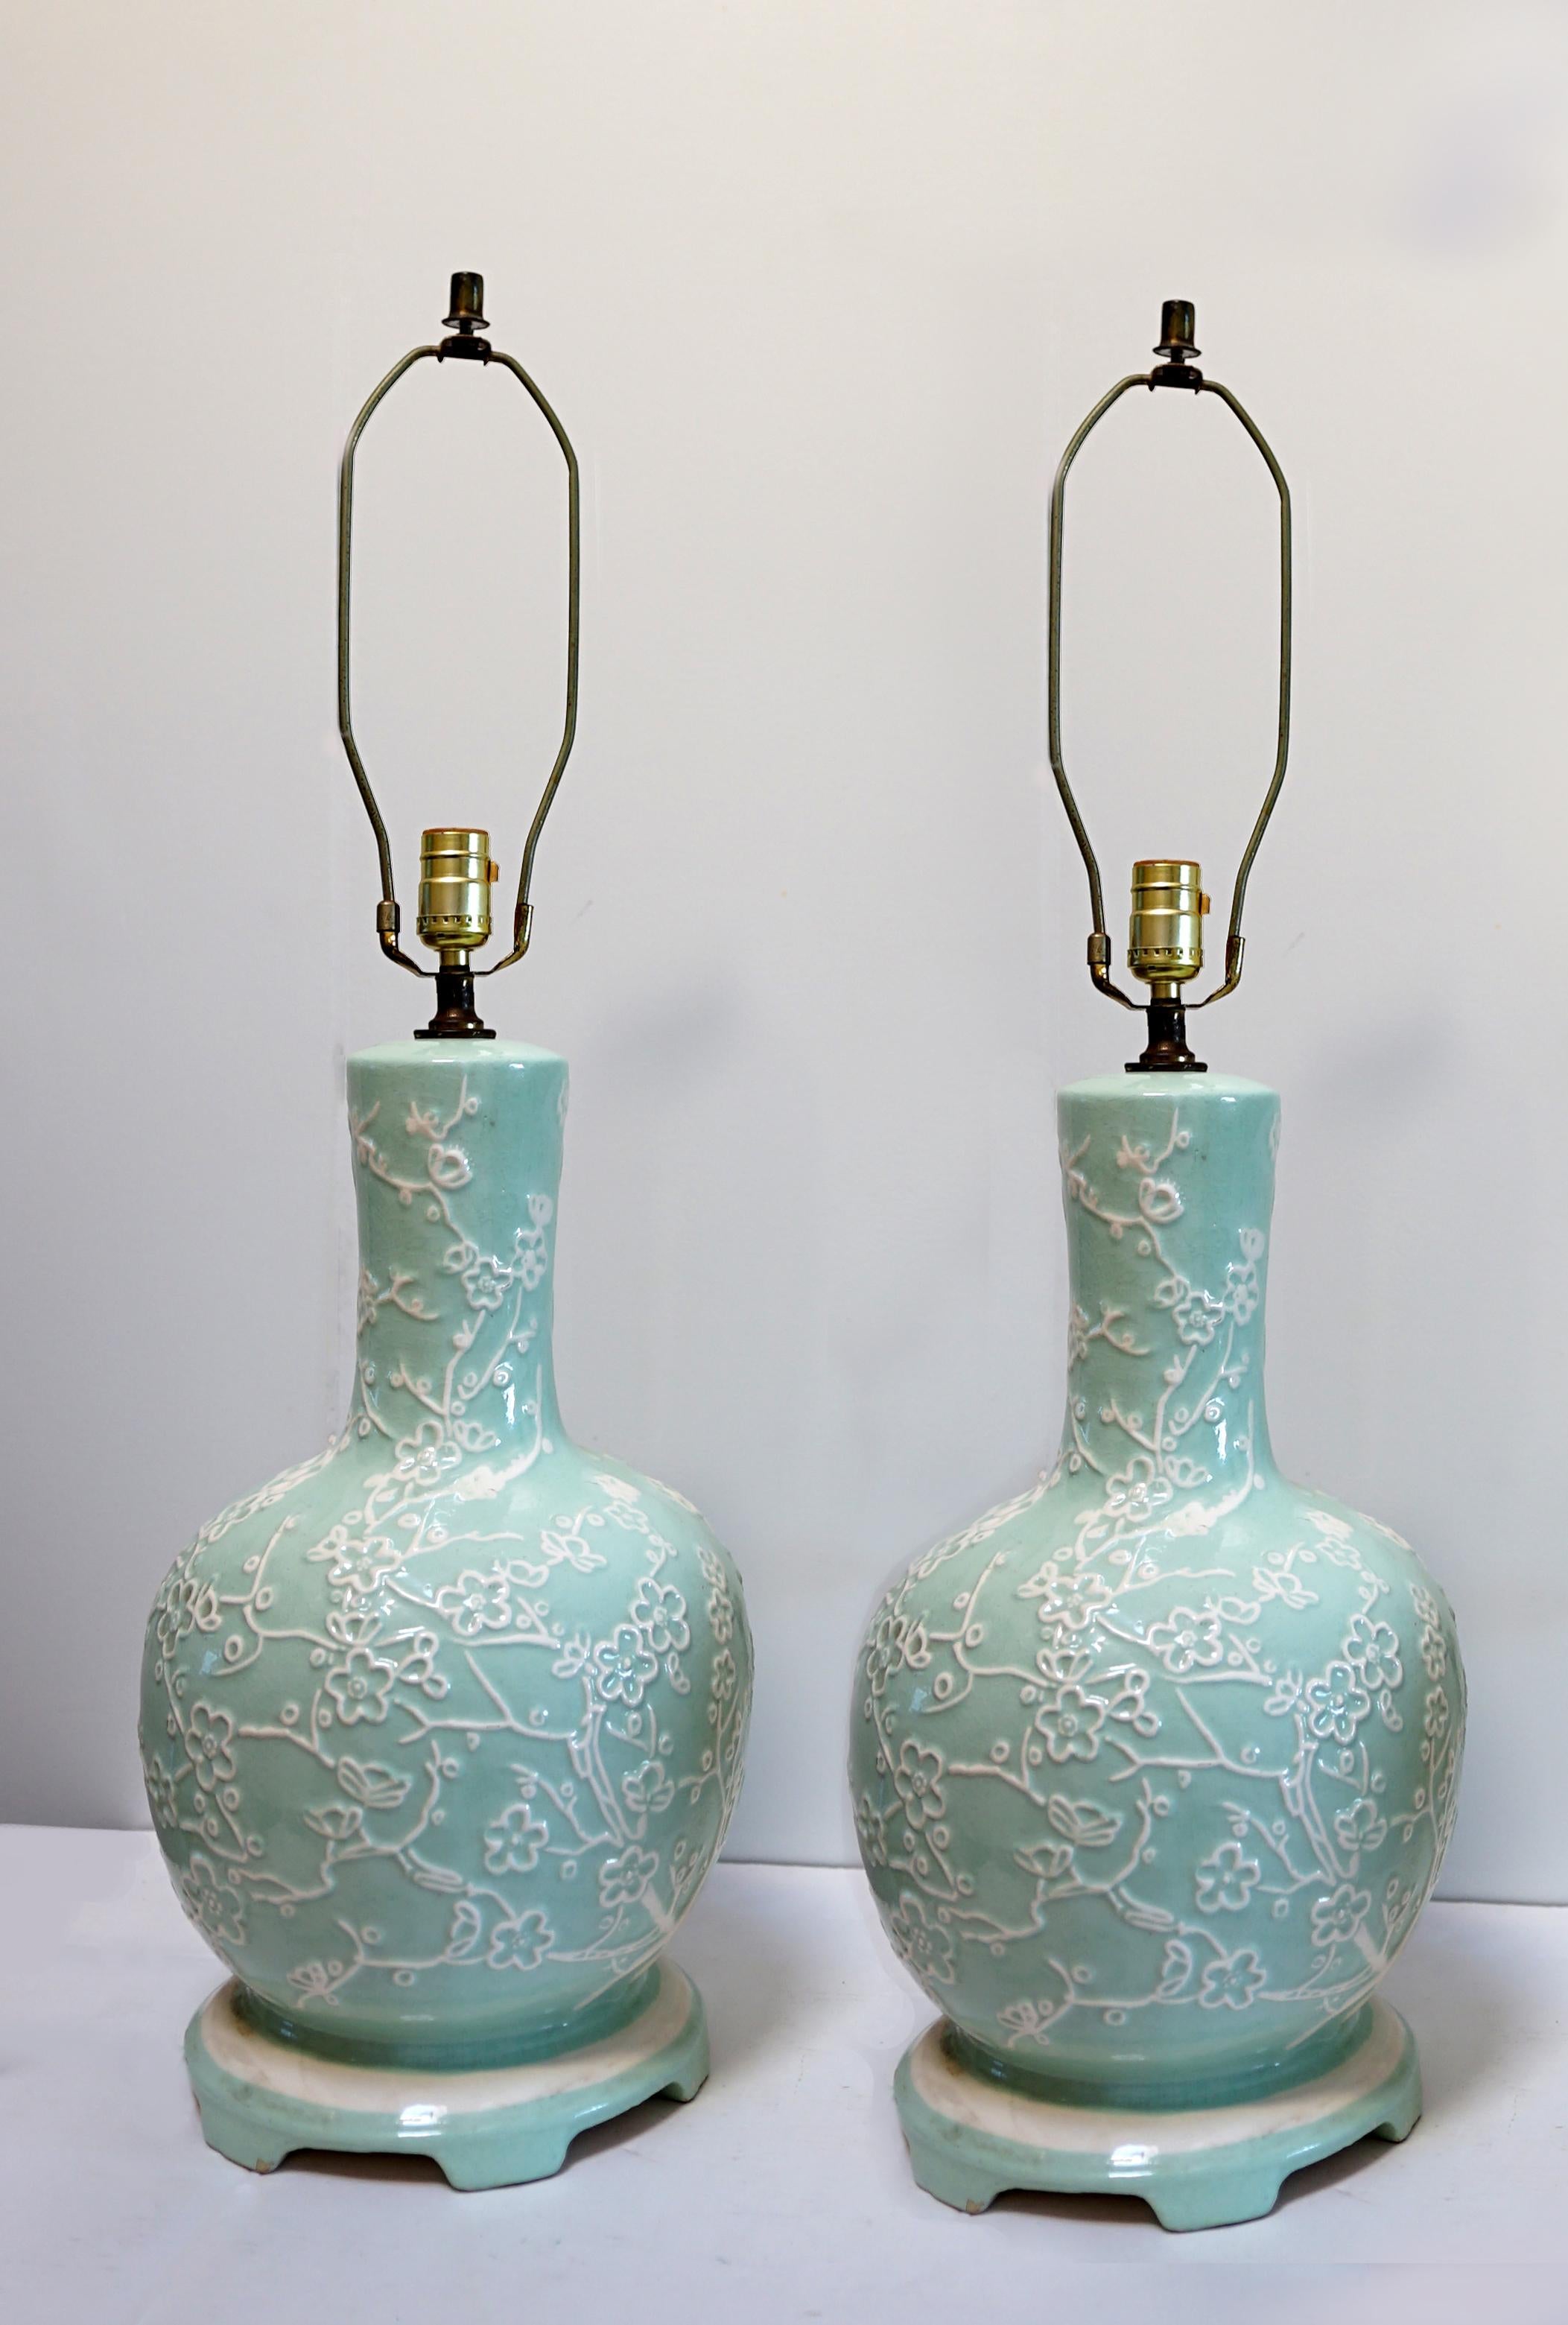 The color and shape of mid century creativity and beauty are the defining quality of this pair of enamel porcelain table lamps. East meets West in the robin's egg blue and white table lamps. They are just stunning. Each of circular section and